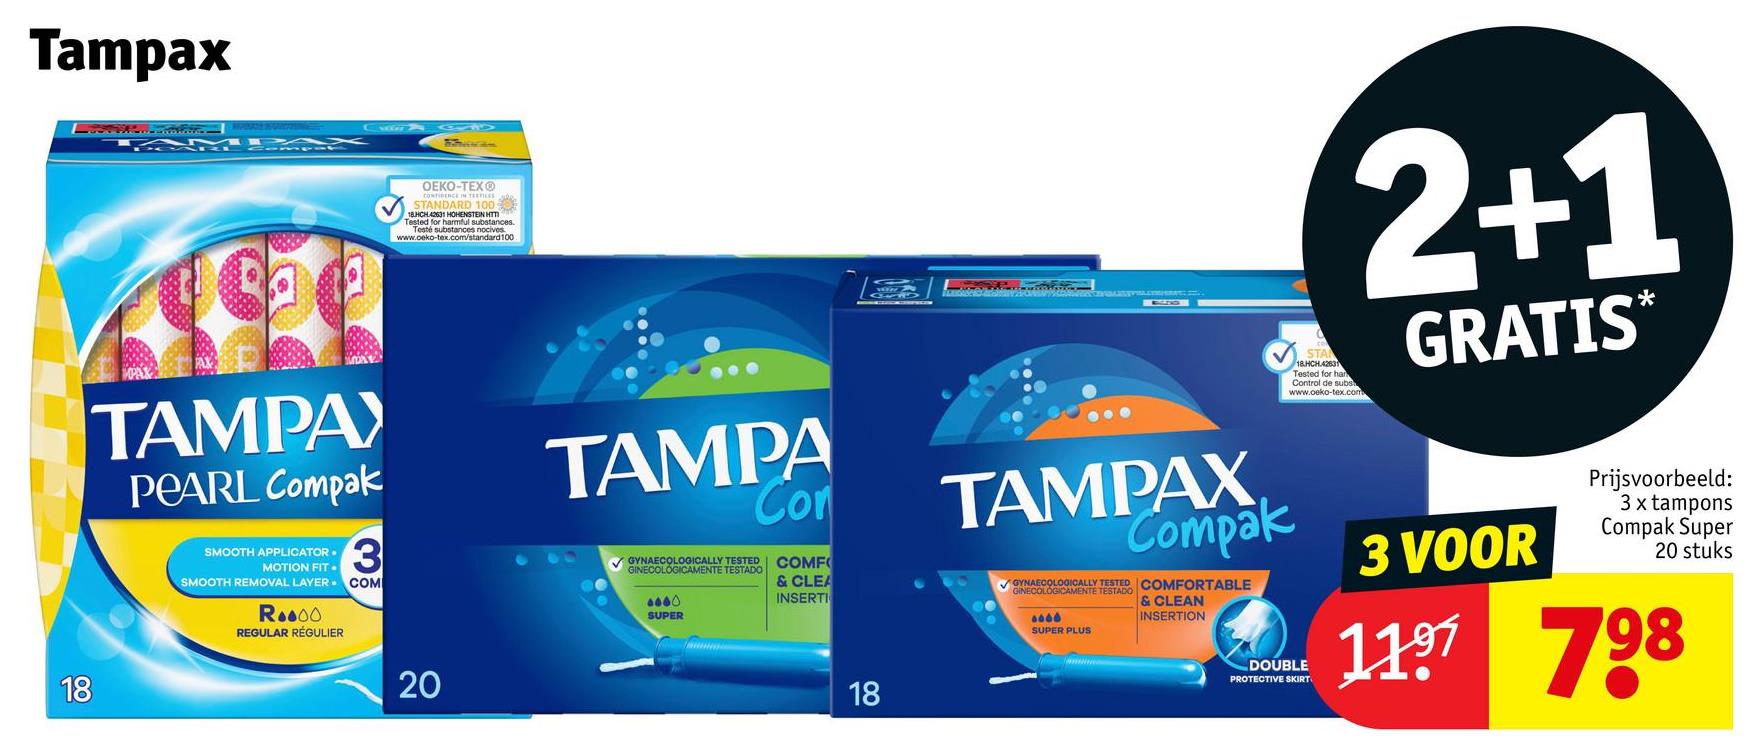 Tampax
OEKO-TEX®
CONFIDENCE IN TEXTILES
STANDARD 100 63
18HCH 42631 HOHENSTEIN HTT
Tested for harmful substances.
Testé substances nocives
www.oeko-tex.com/standard100
TAMPAY
PEARL Compak
SMOOTH APPLICATOR.
MOTION FIT.
3
SMOOTH REMOVAL LAYER.COM
Roo00
REGULAR RÉGULIER
18
20
TAMPA
Con
GYNAECOLOGICALLY TESTED
GINECOLOGICAMENTE TESTADO
8880
SUPER
COMF
& CLEA
INSERTI
18
STA
18.HCH.42631
Tested for har
Control de subs
www.oeko-tex.com
2+1
GRATIS*
TAMPAX
Compak
GYNAECOLOGICALLY TESTED COMFORTABLE
GINECOLOGICAMENTE TESTADO
6066
SUPER PLUS
& CLEAN
INSERTION
DOUBLE
PROTECTIVE SKIRT
3 VOOR
Prijsvoorbeeld:
3 x tampons
Compak Super
20 stuks
1197 798